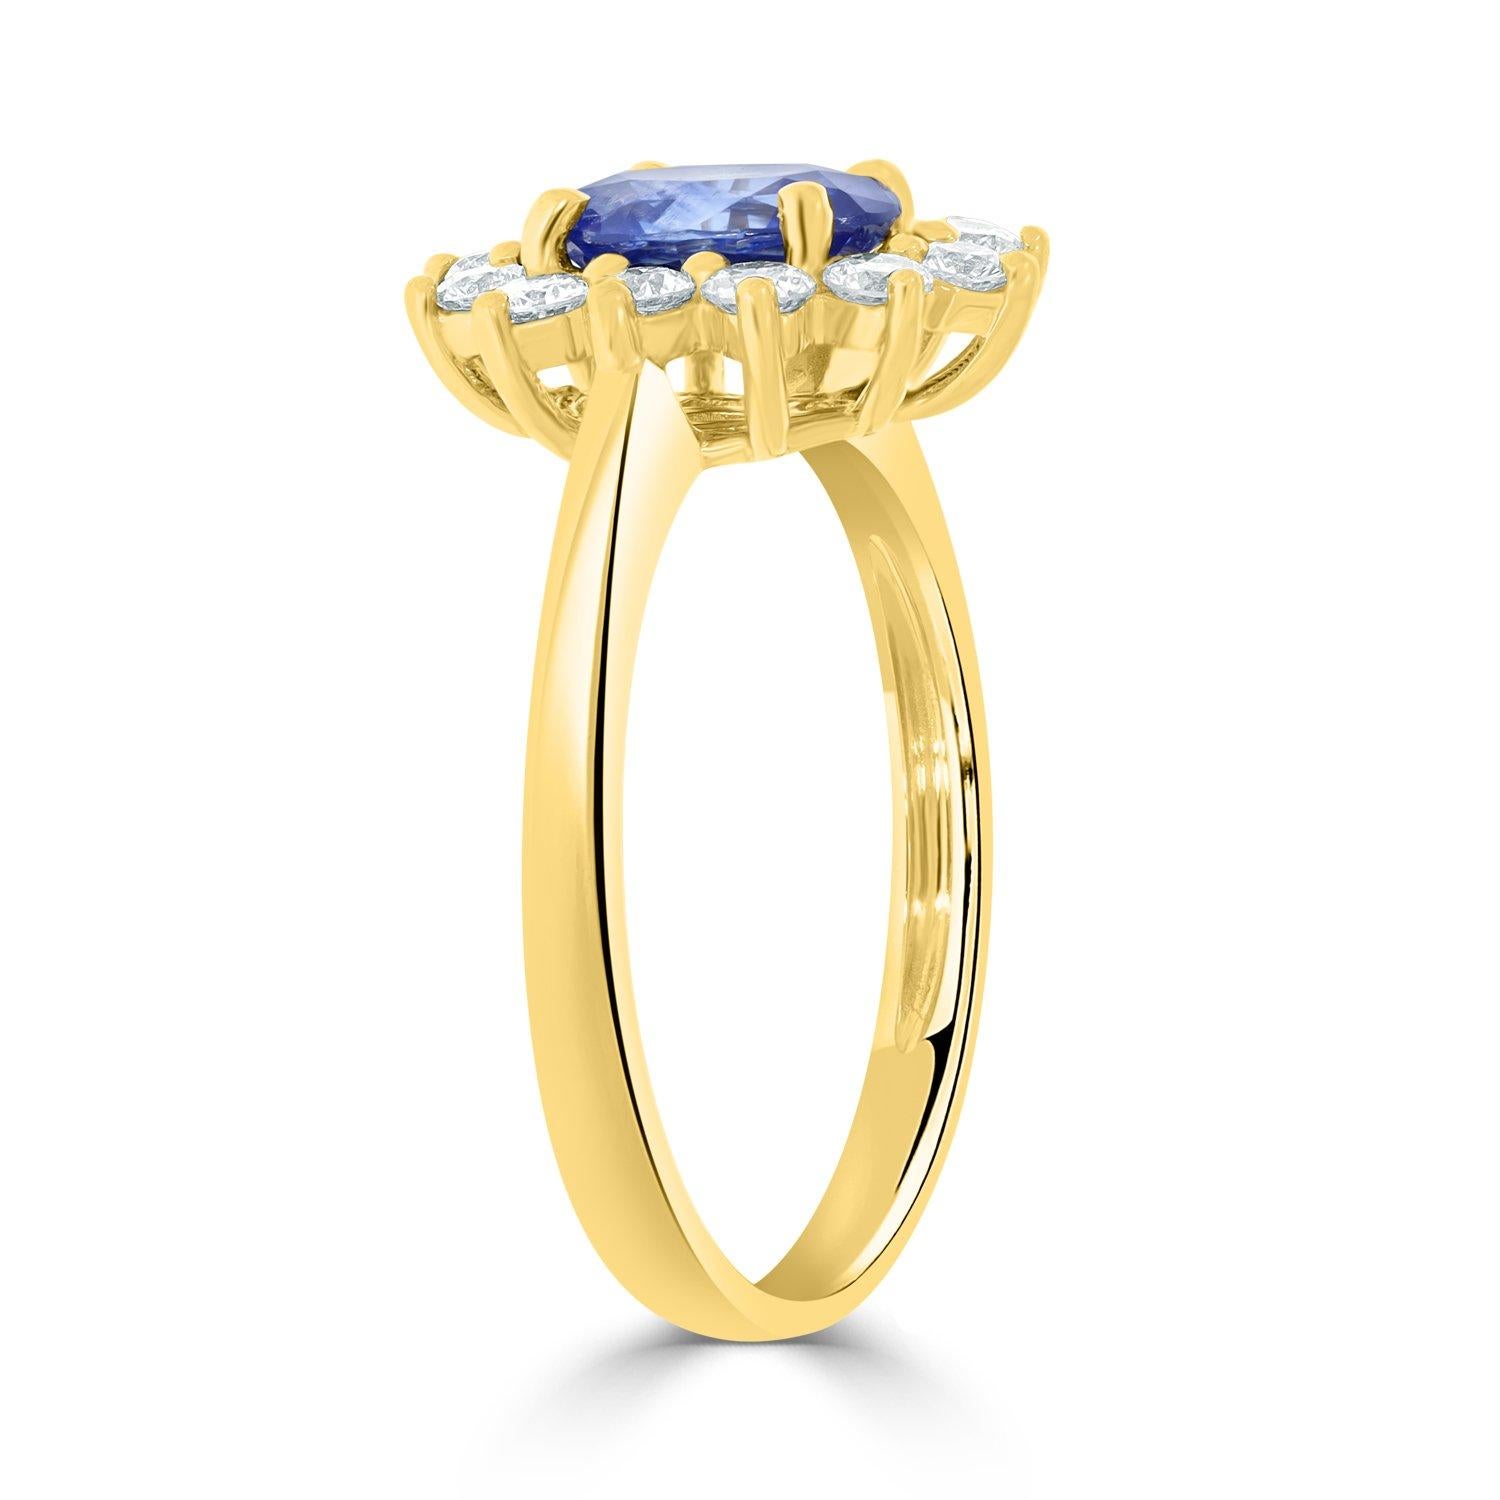 Oval Cut 1.25Ct Sunburst Sapphire Ring with 0.51Tct Diamonds Set in 18K Yellow Gold For Sale